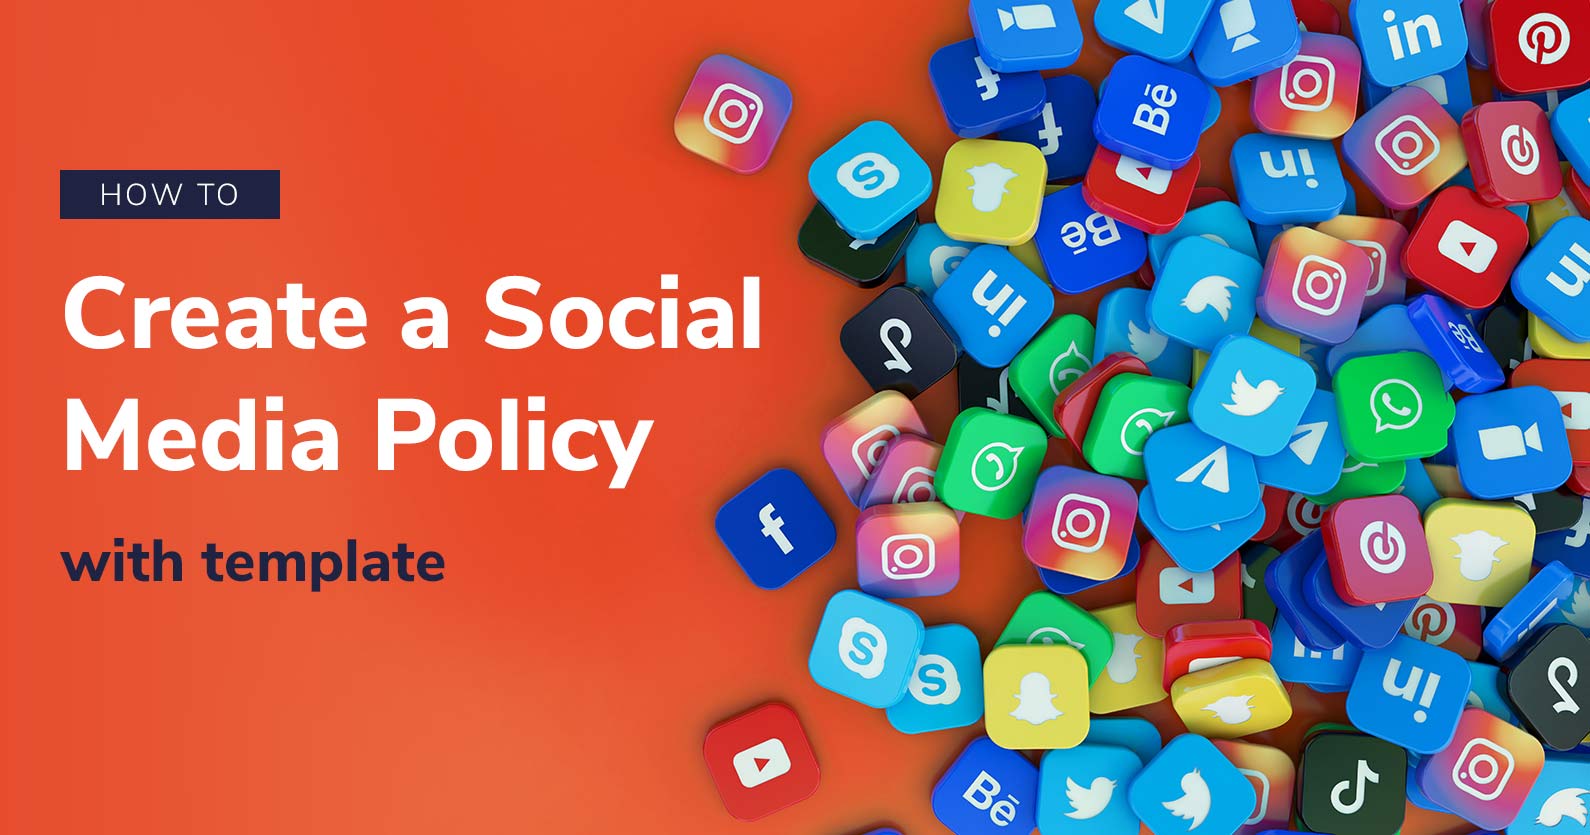 Social media illustration with post title: How to Create a Social Media Policy